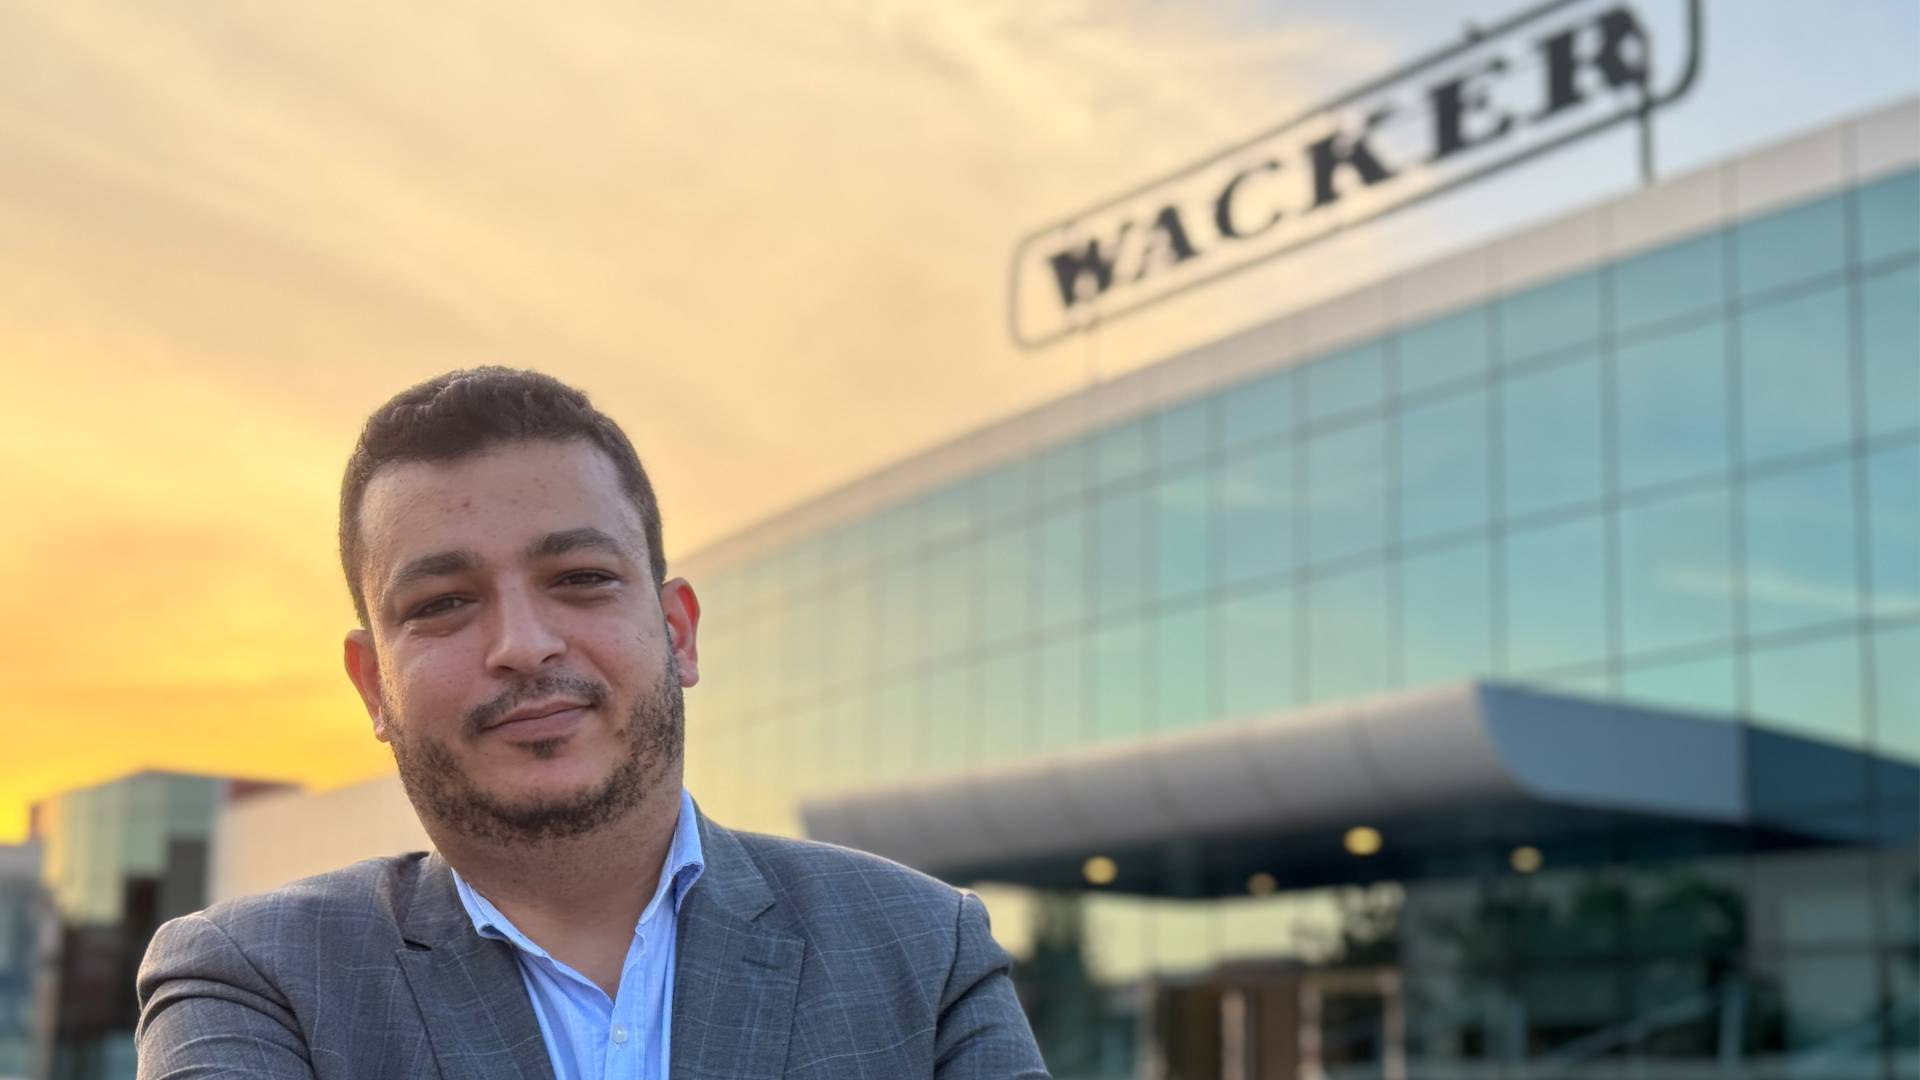 An employee of WACKER Middle East in front of the company building